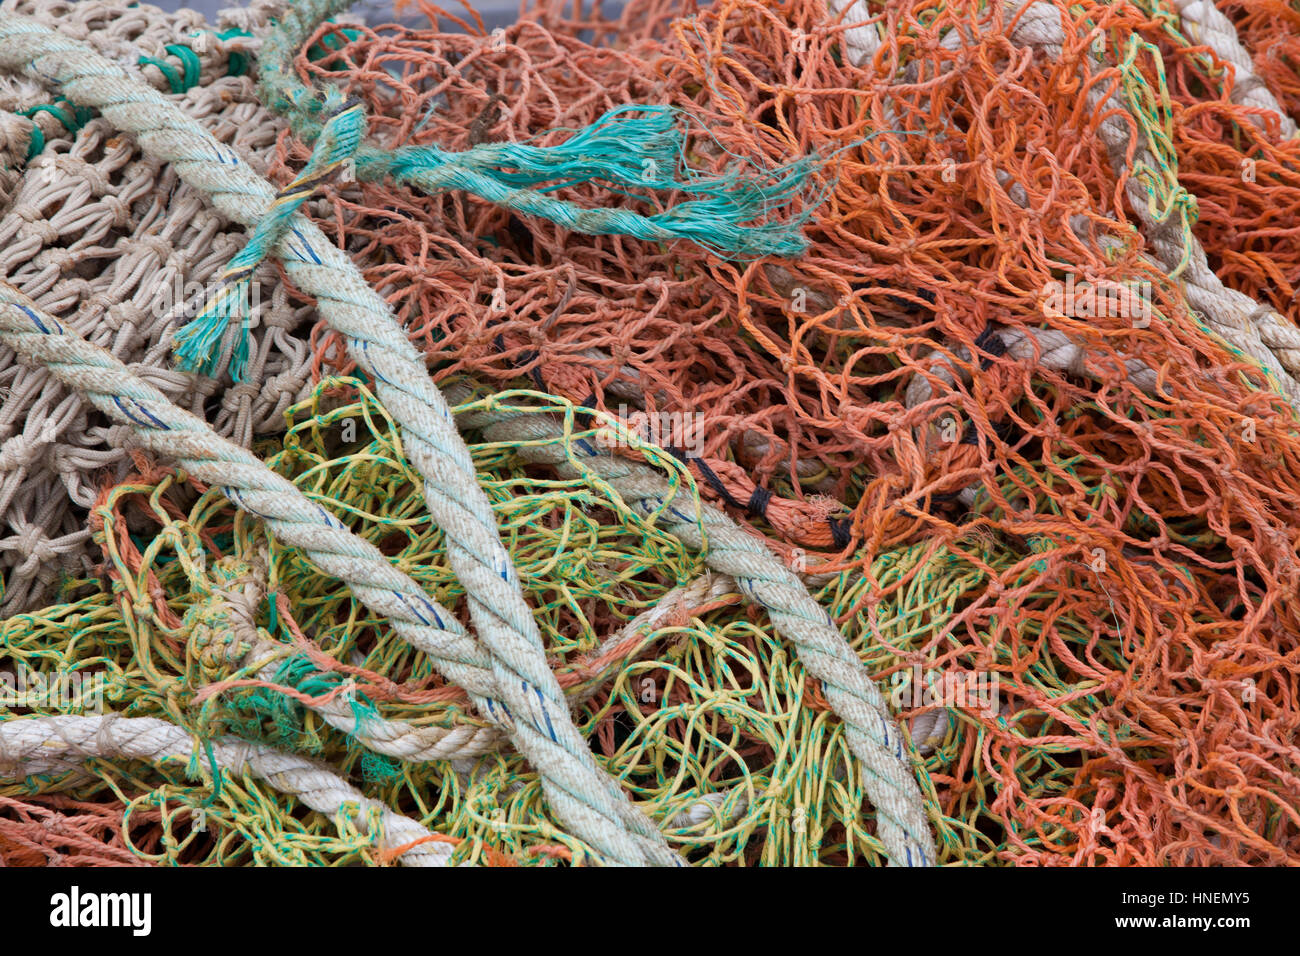 Close-up view of fishing rope and nets Stock Photo